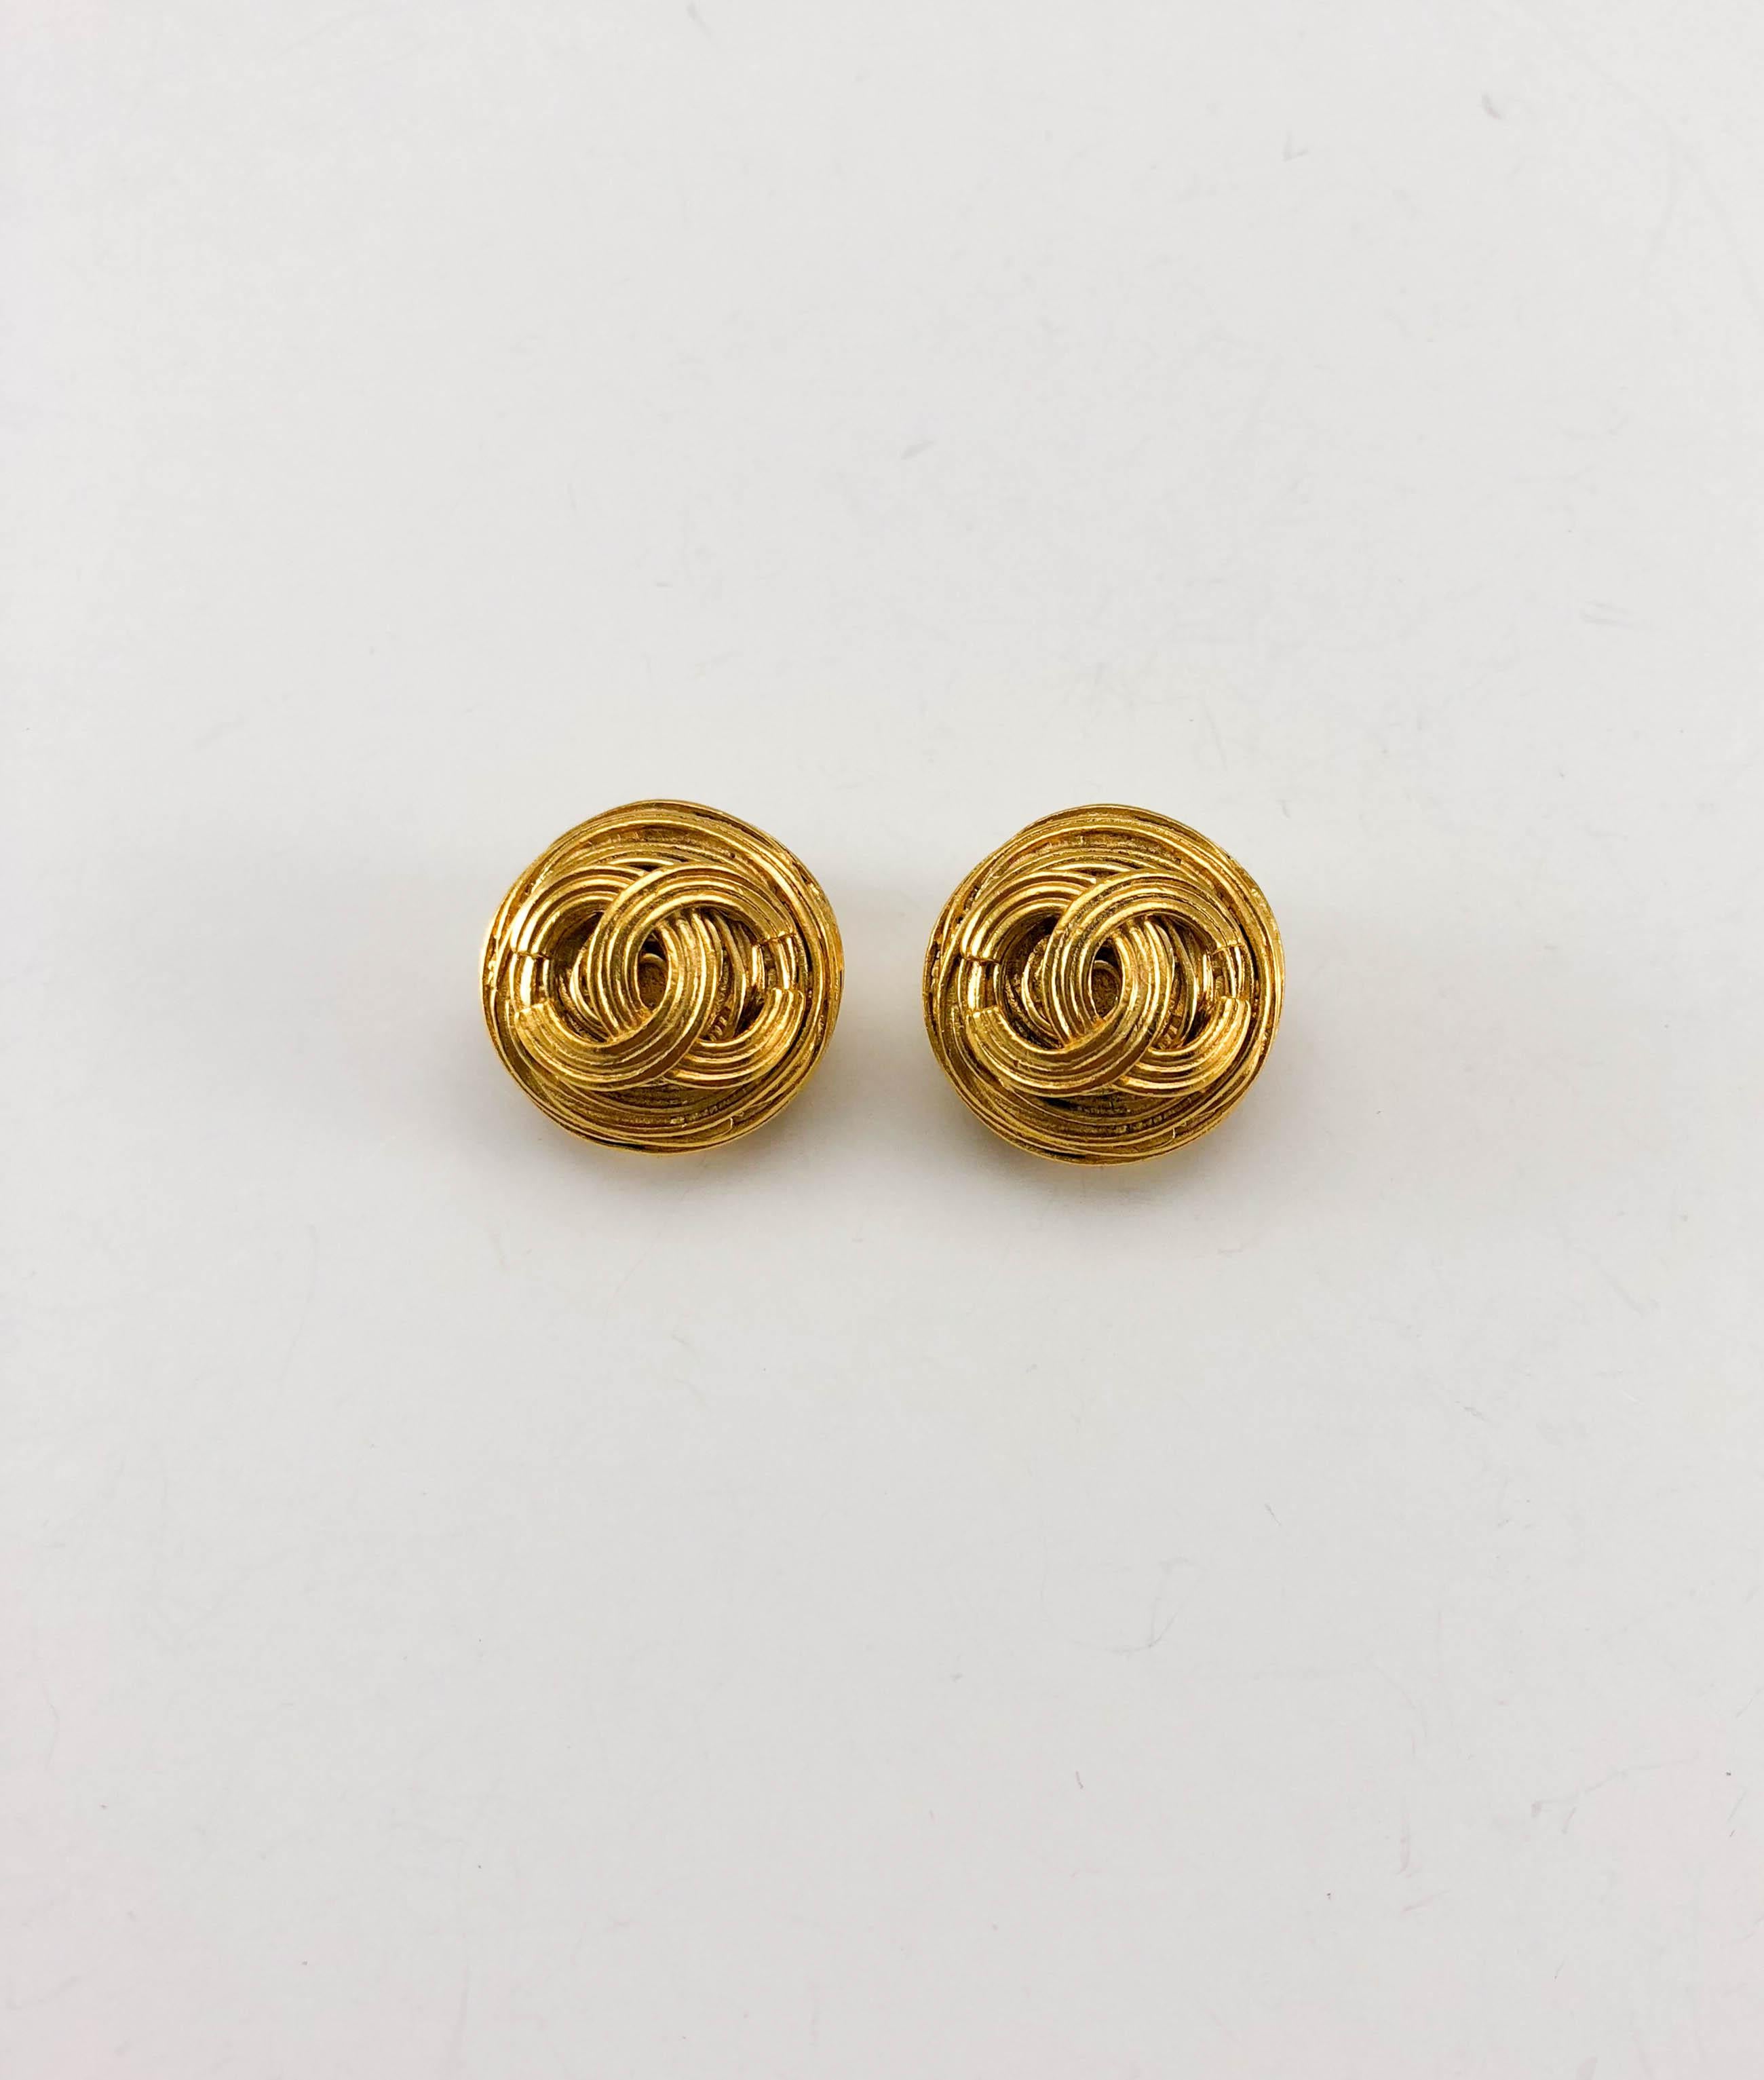 Vintage Chanel Gold-Plated Round Clip-On Logo Earrings. These very stylish earrings by Chanel were crafted for the 1994 Autumn / Winter Collection. Made in gold-plated metal and resembling straws, they feature the iconic ‘CC’ logo in the centre.